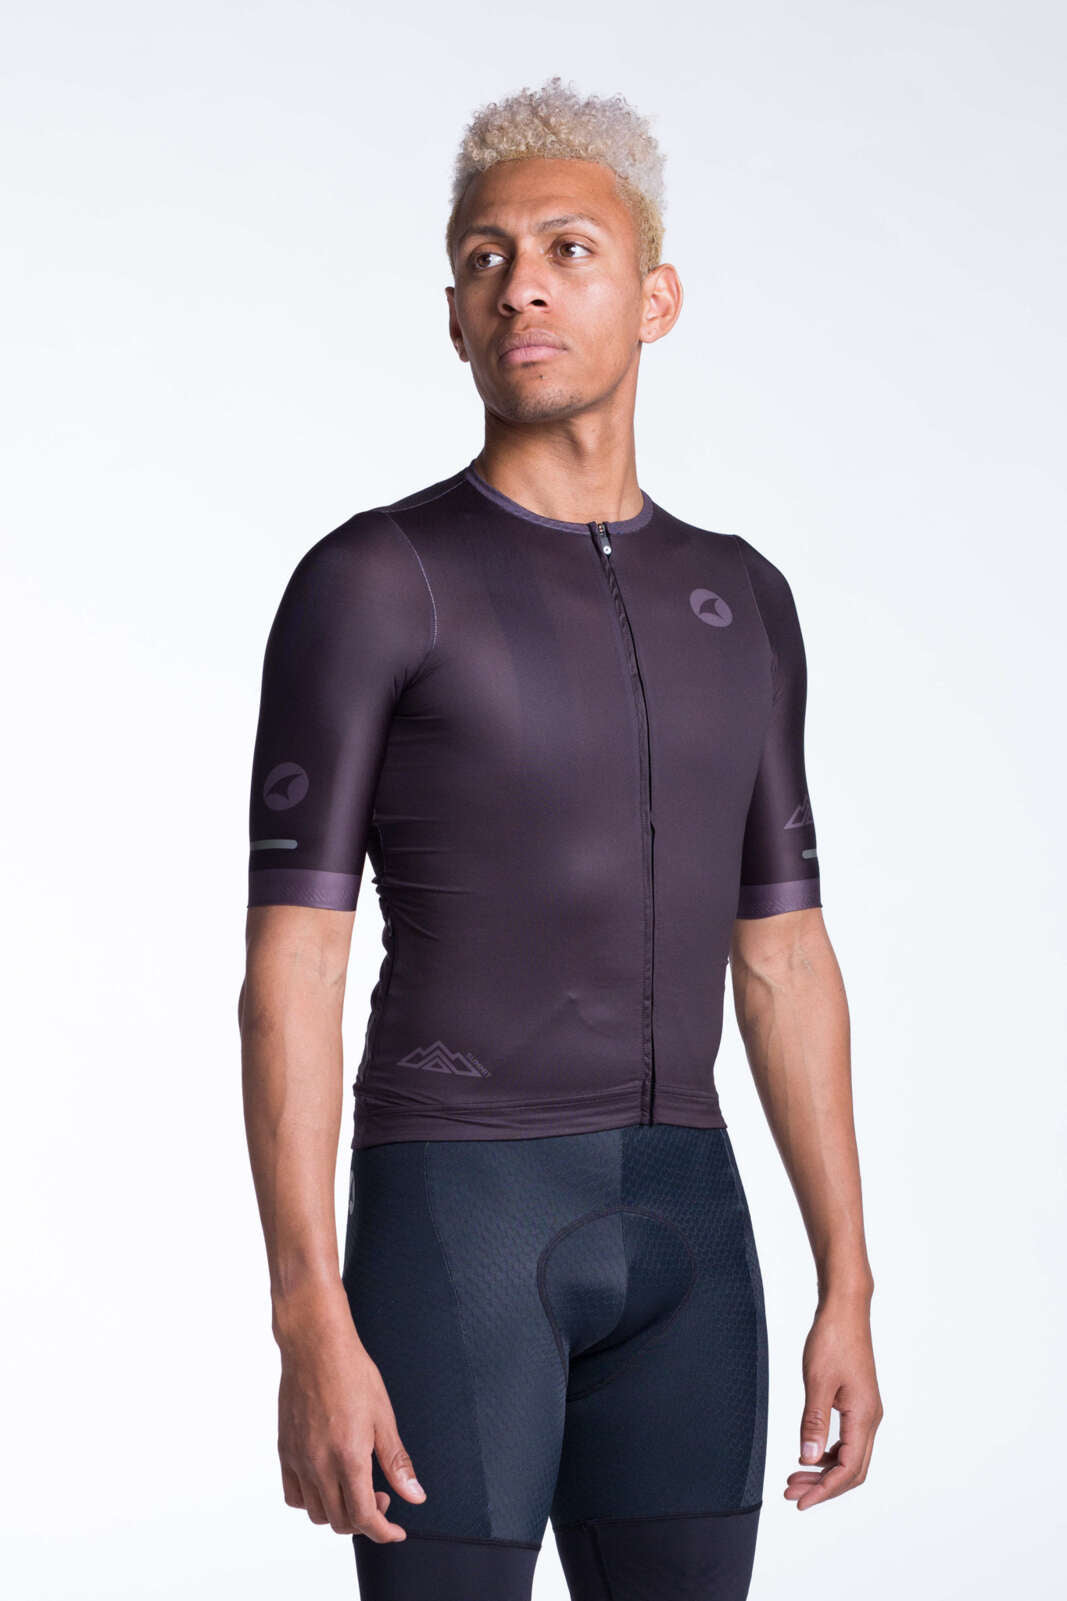 Men's Black Aero Cycling Jersey - Summit Front View